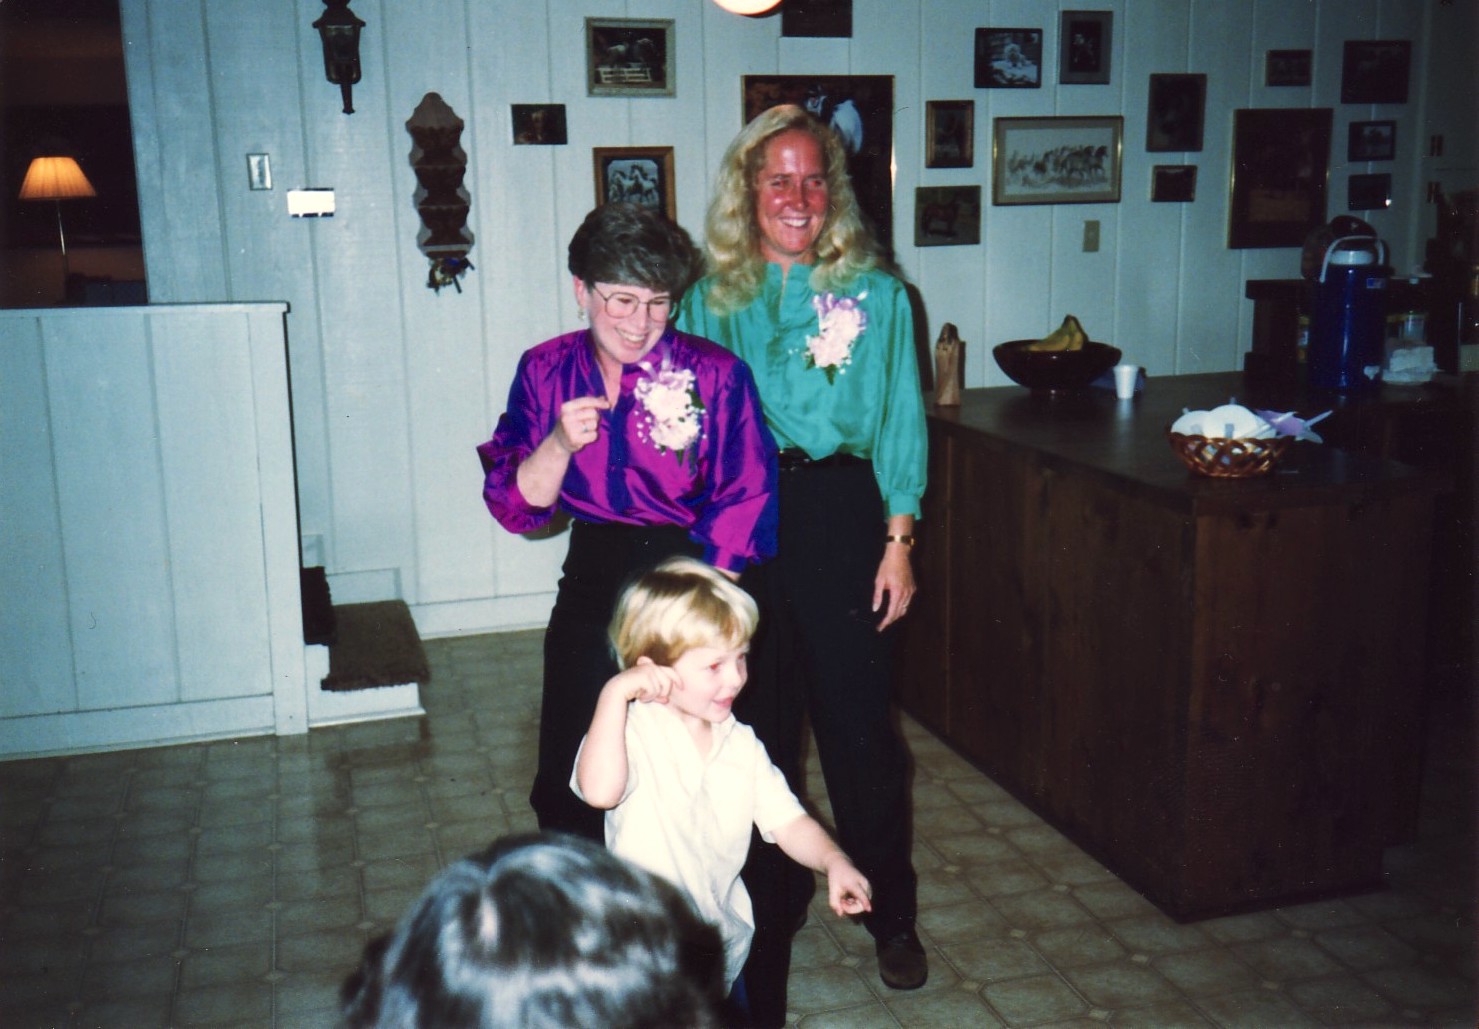 Jennifer Crossen, Joan Callahan (her partner), and David Crossen (her son) at their commitment ceremony, which was officiated at their house in Lexington, KY, 1989. The minister was from the Unitarian Church.